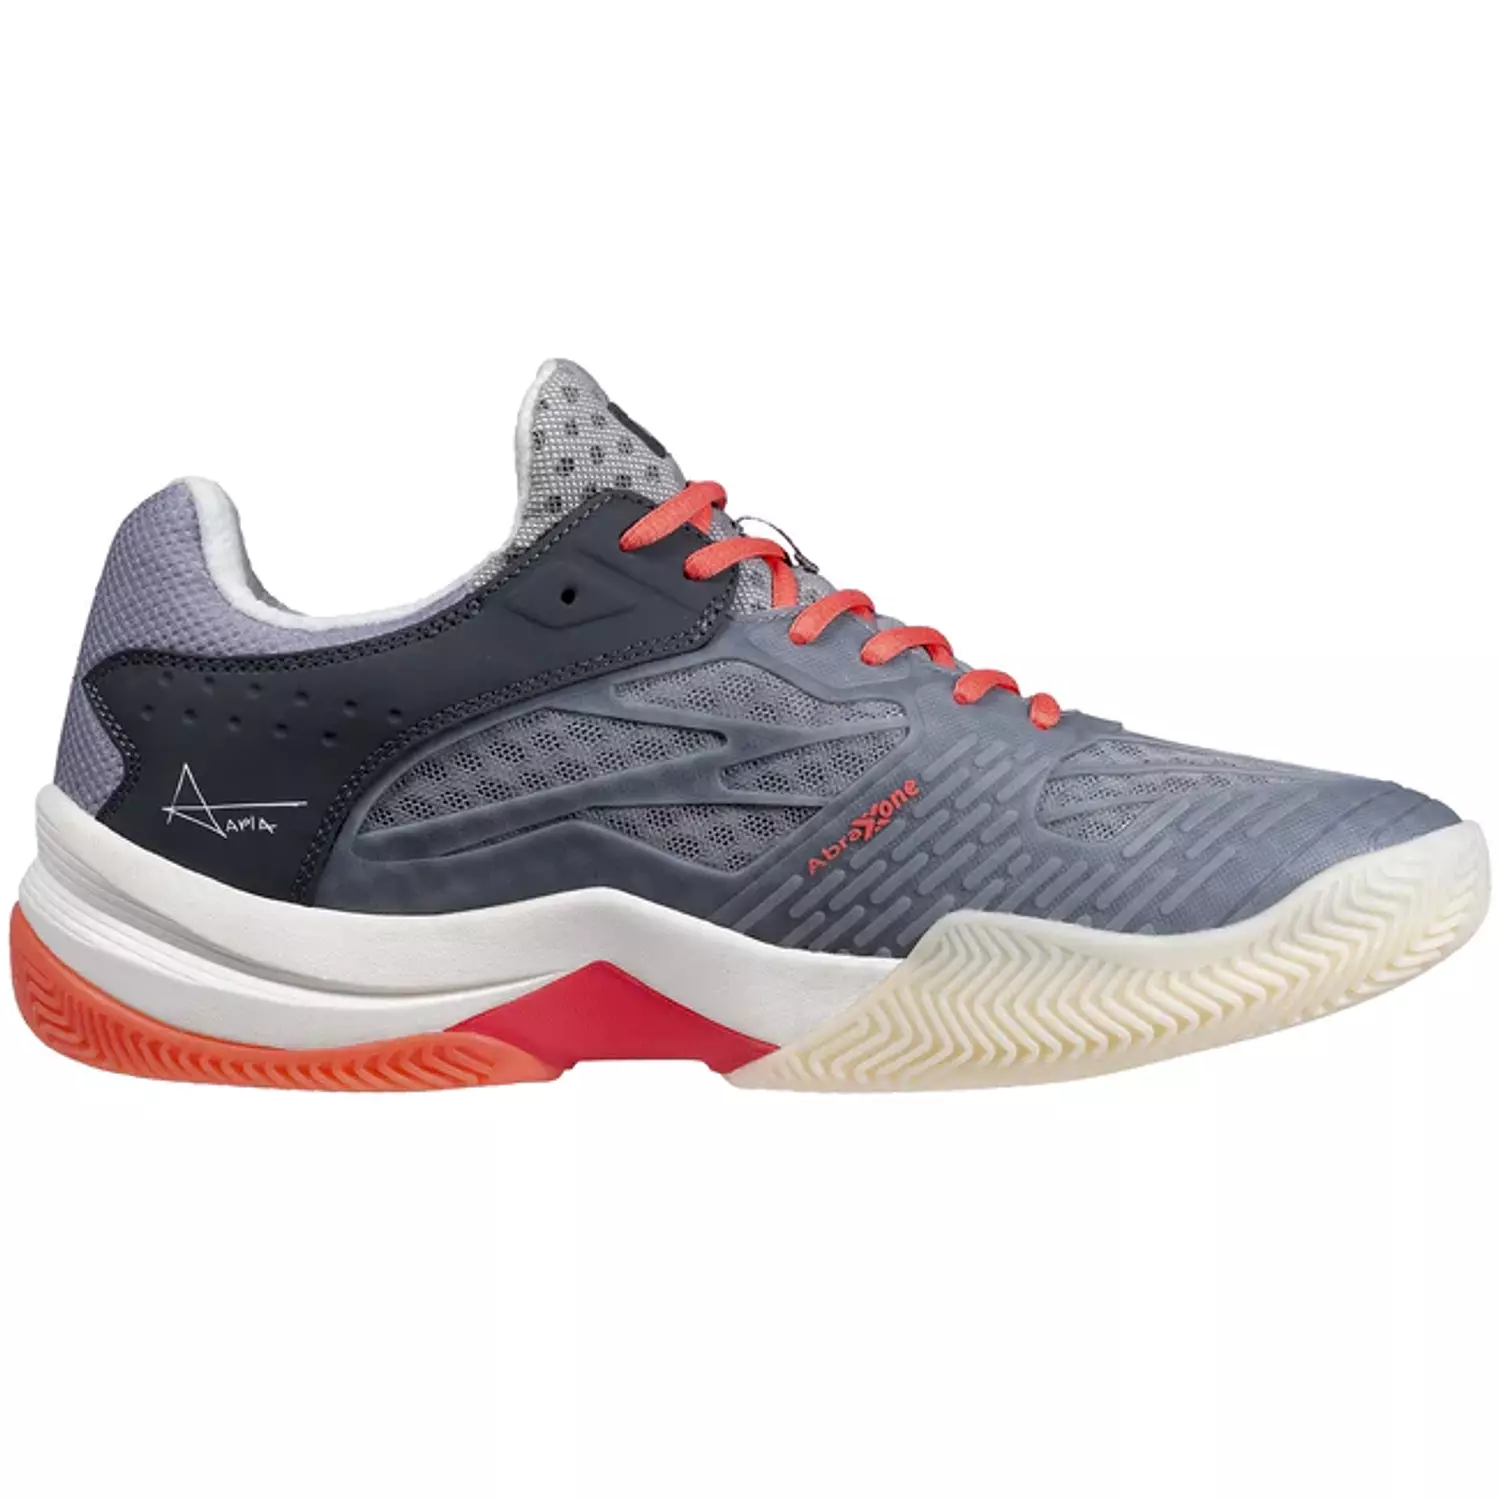 AT10 LUX Padel Shoes Cool Grey/Georgia Peach-2nd-img